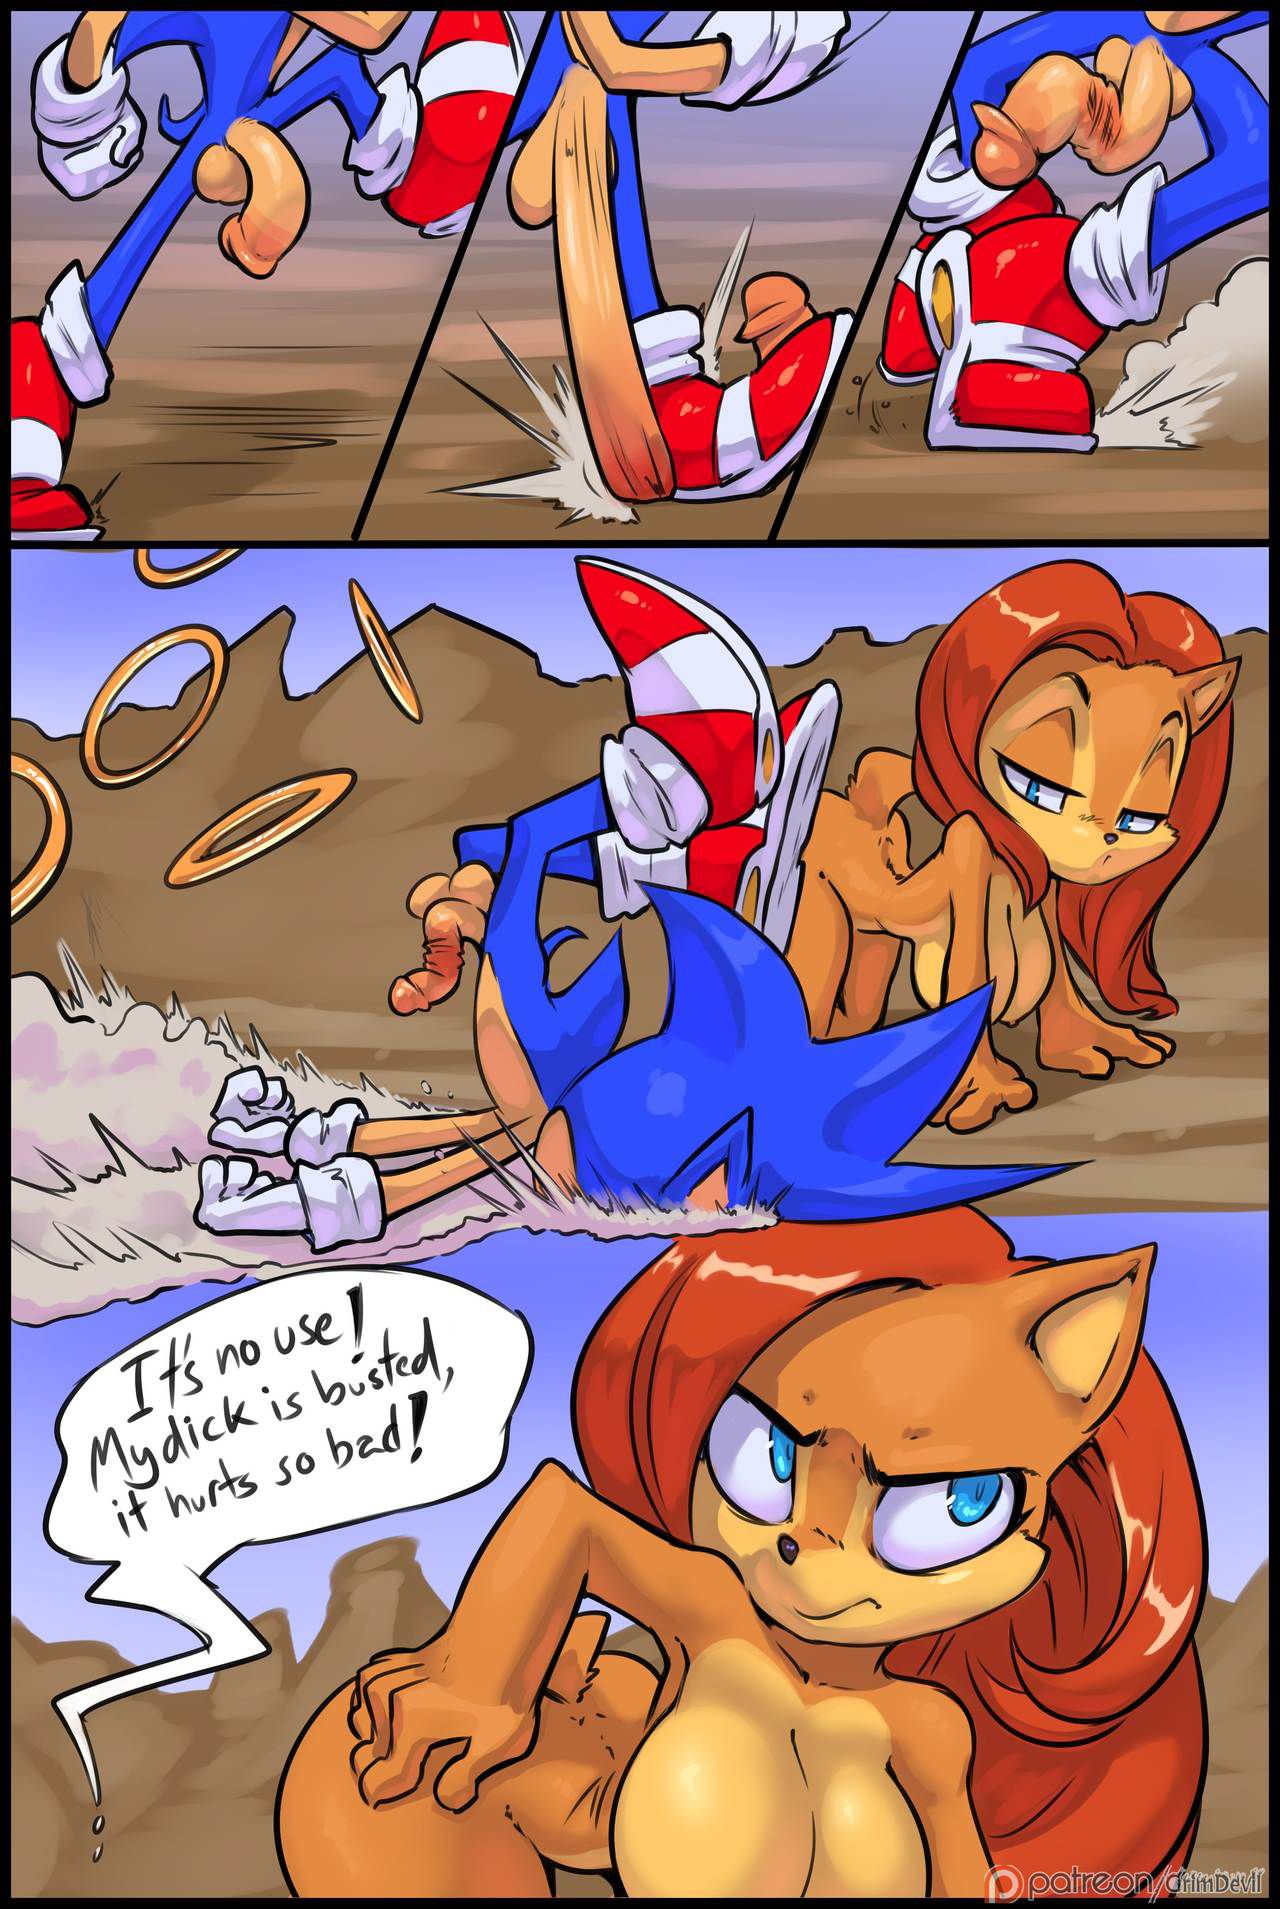 [GrimDevil] Sally Comic (Sonic The Hedgehog) [Ongoing] 9